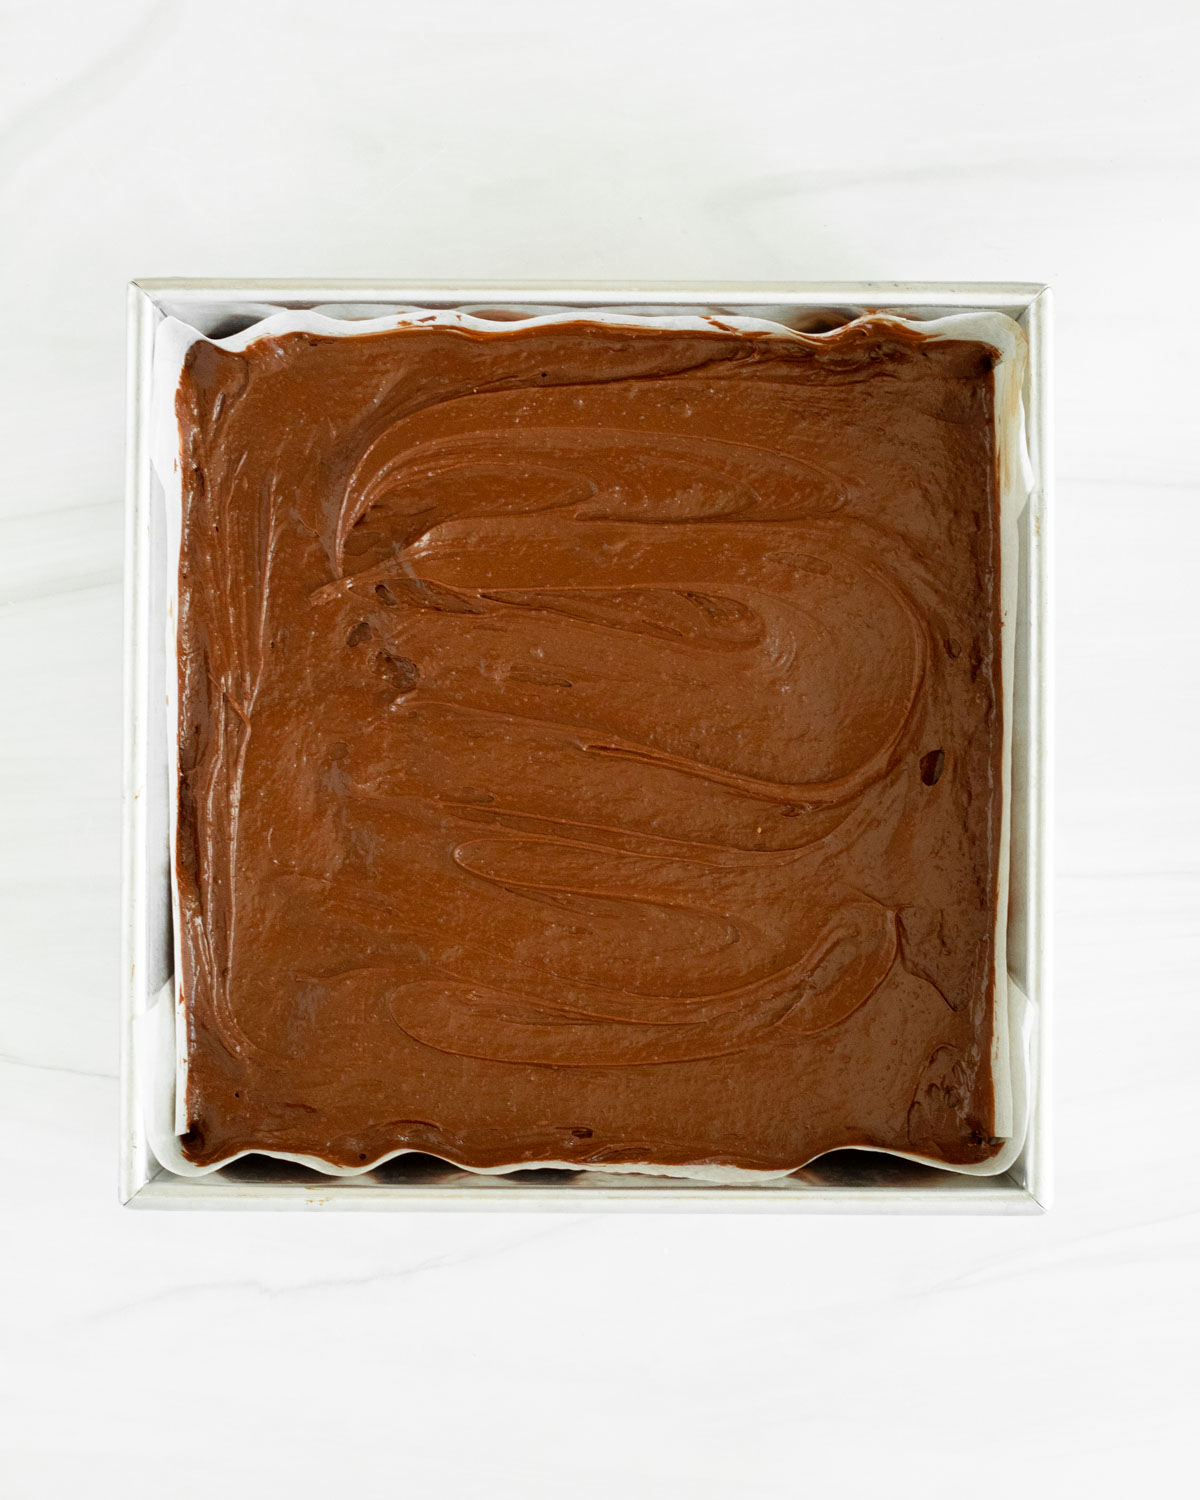 Step 11. Pour the brownie batter into a pan